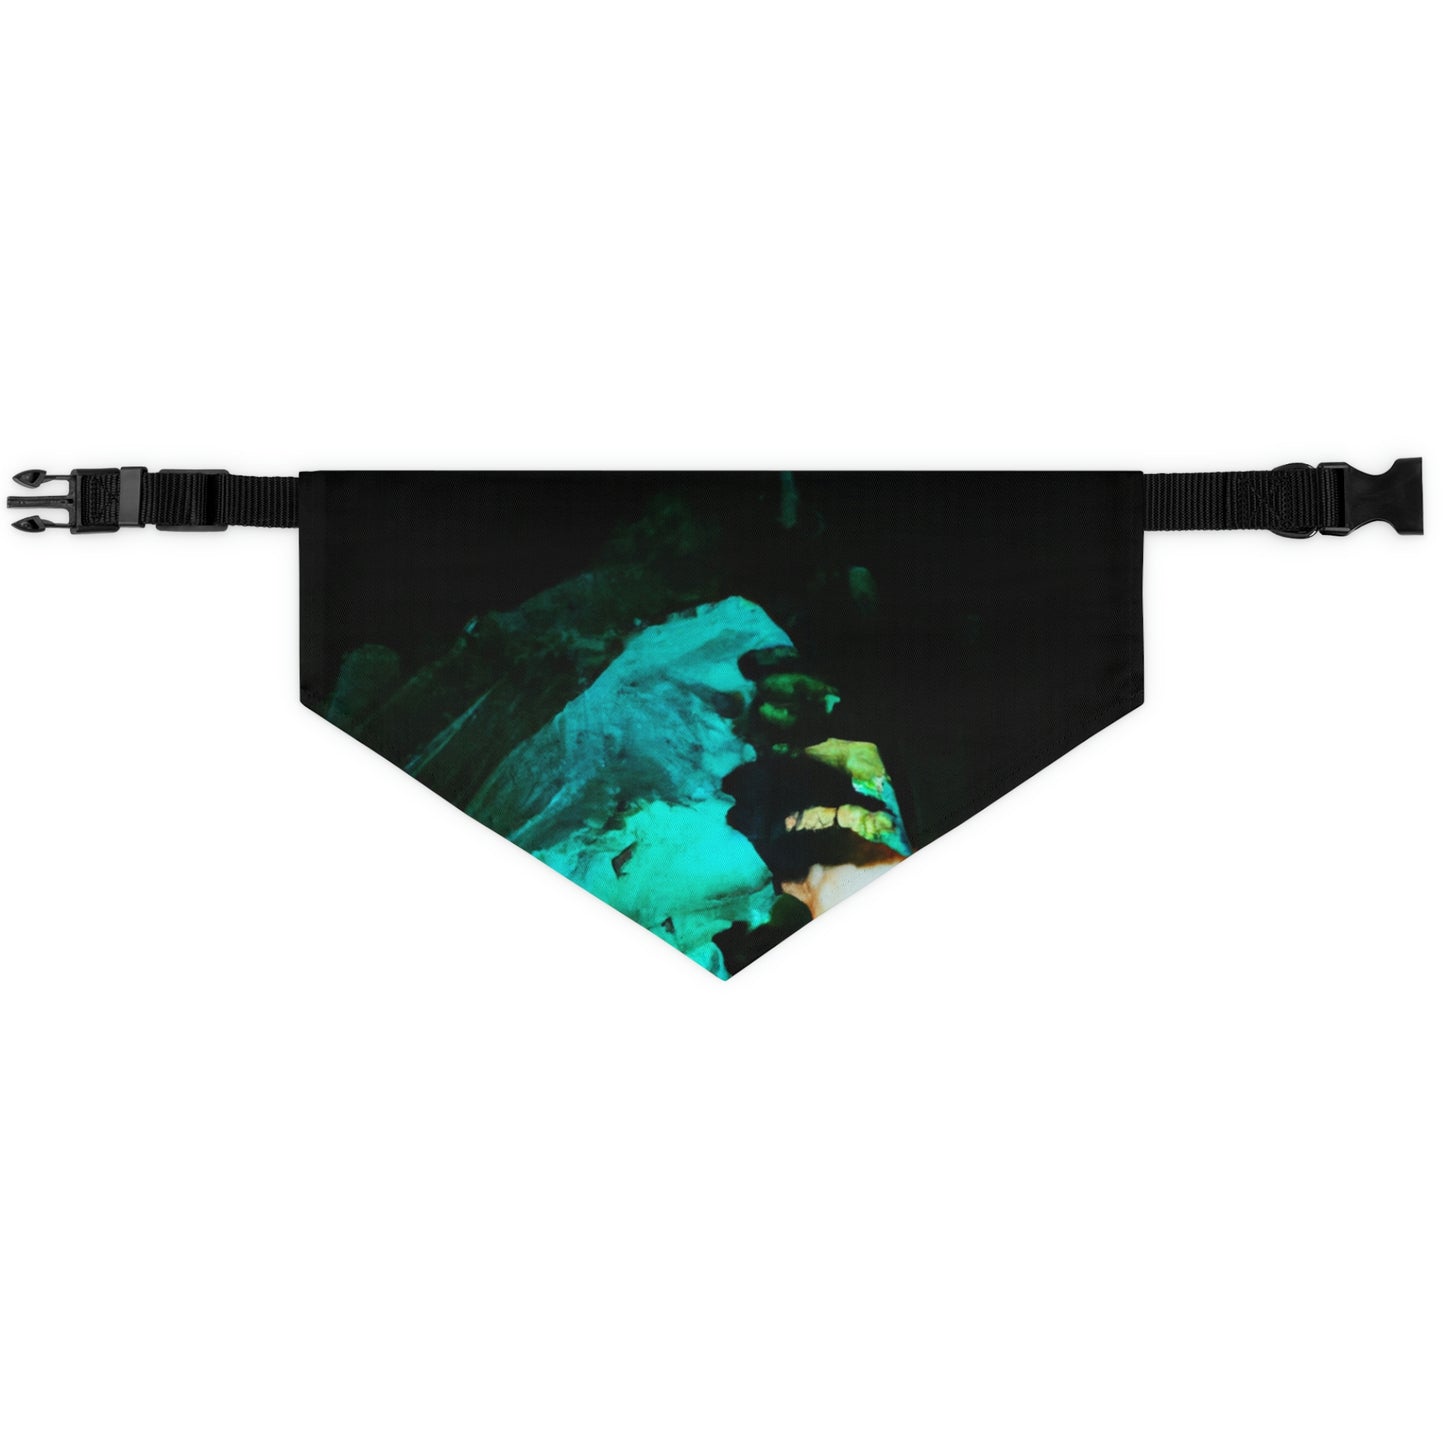 The Gleaming Relic of the Cave - The Alien Pet Bandana Collar